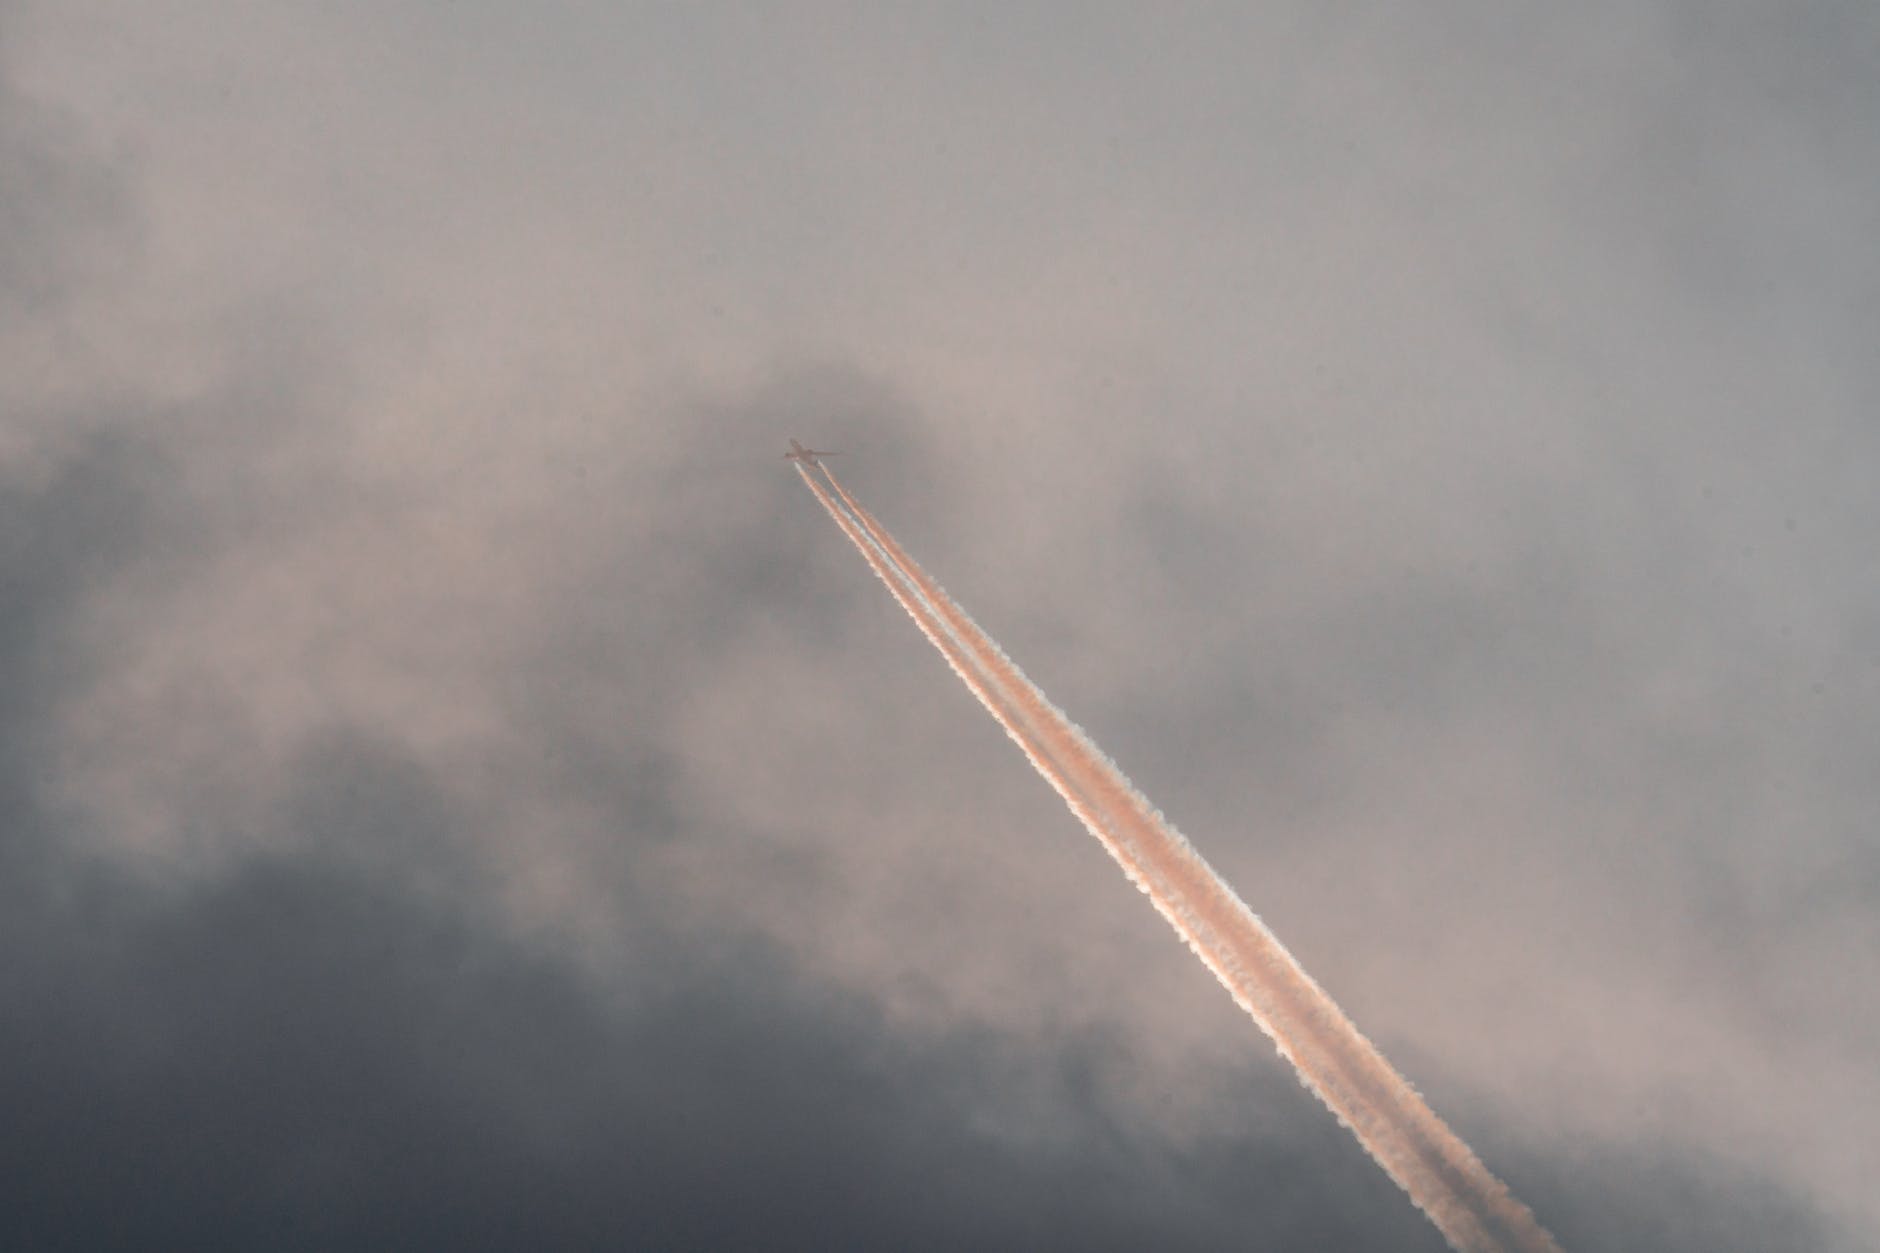 airplane flying in cloudy evening sky